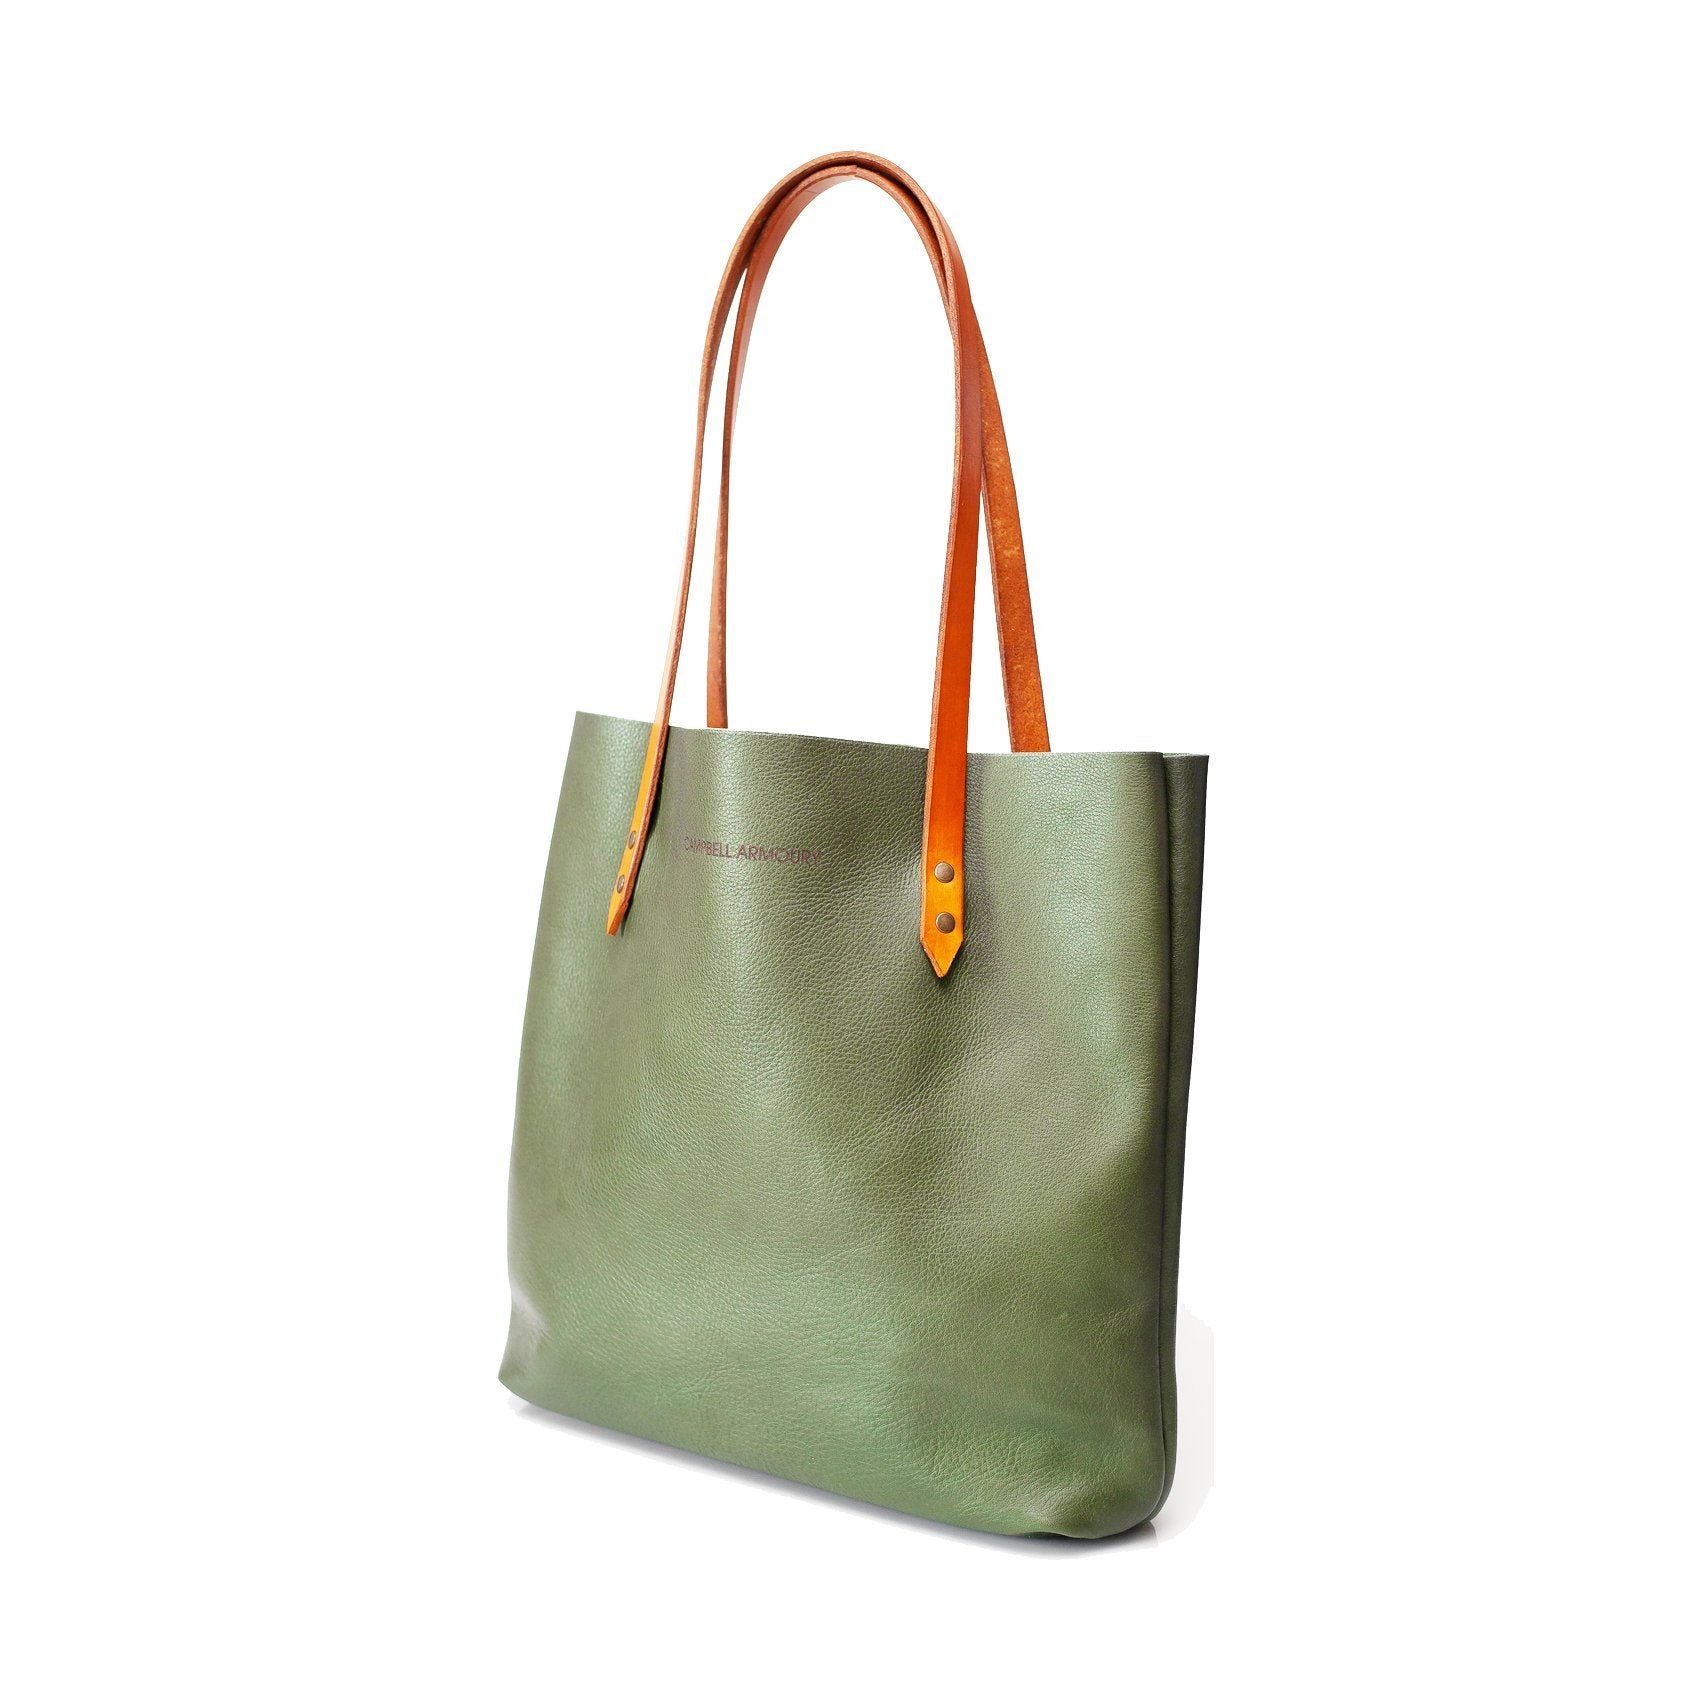 Campbell Armoury Leather Soft Tote Bag clothing & accessories Campbell Armoury olive